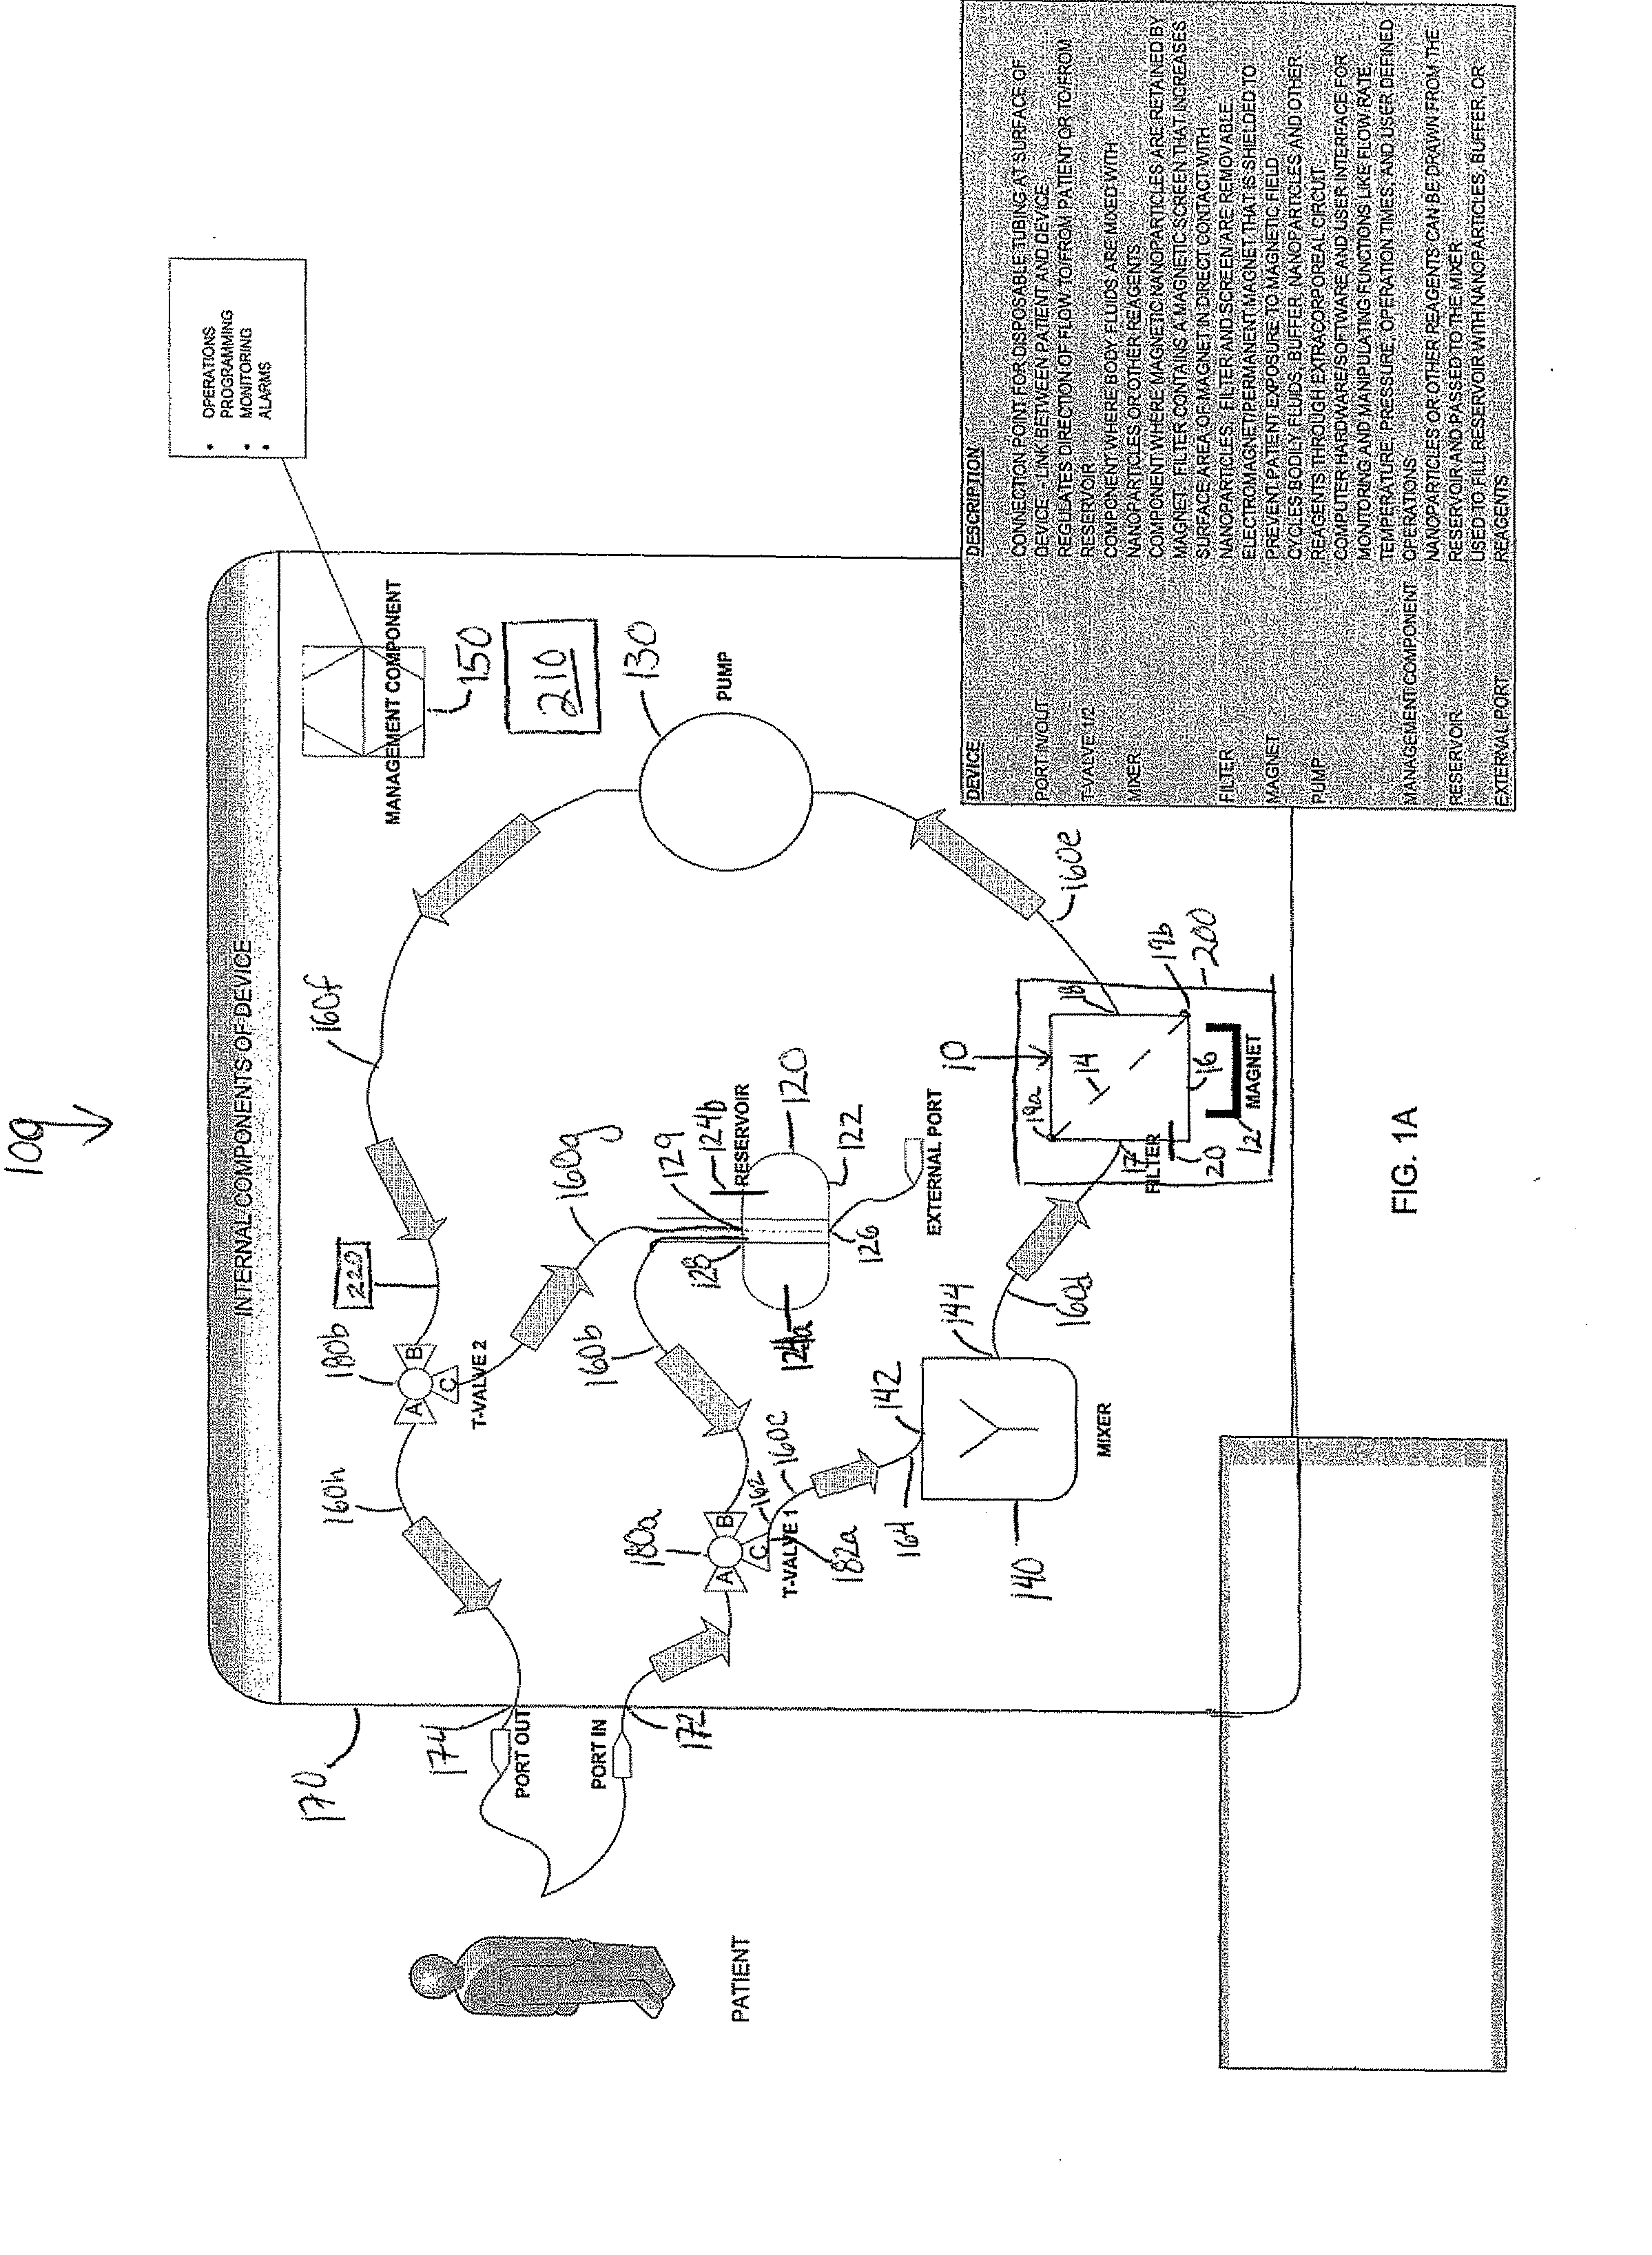 Device and method of using superparamagnetic nanoparticles in treatment and removal of cells